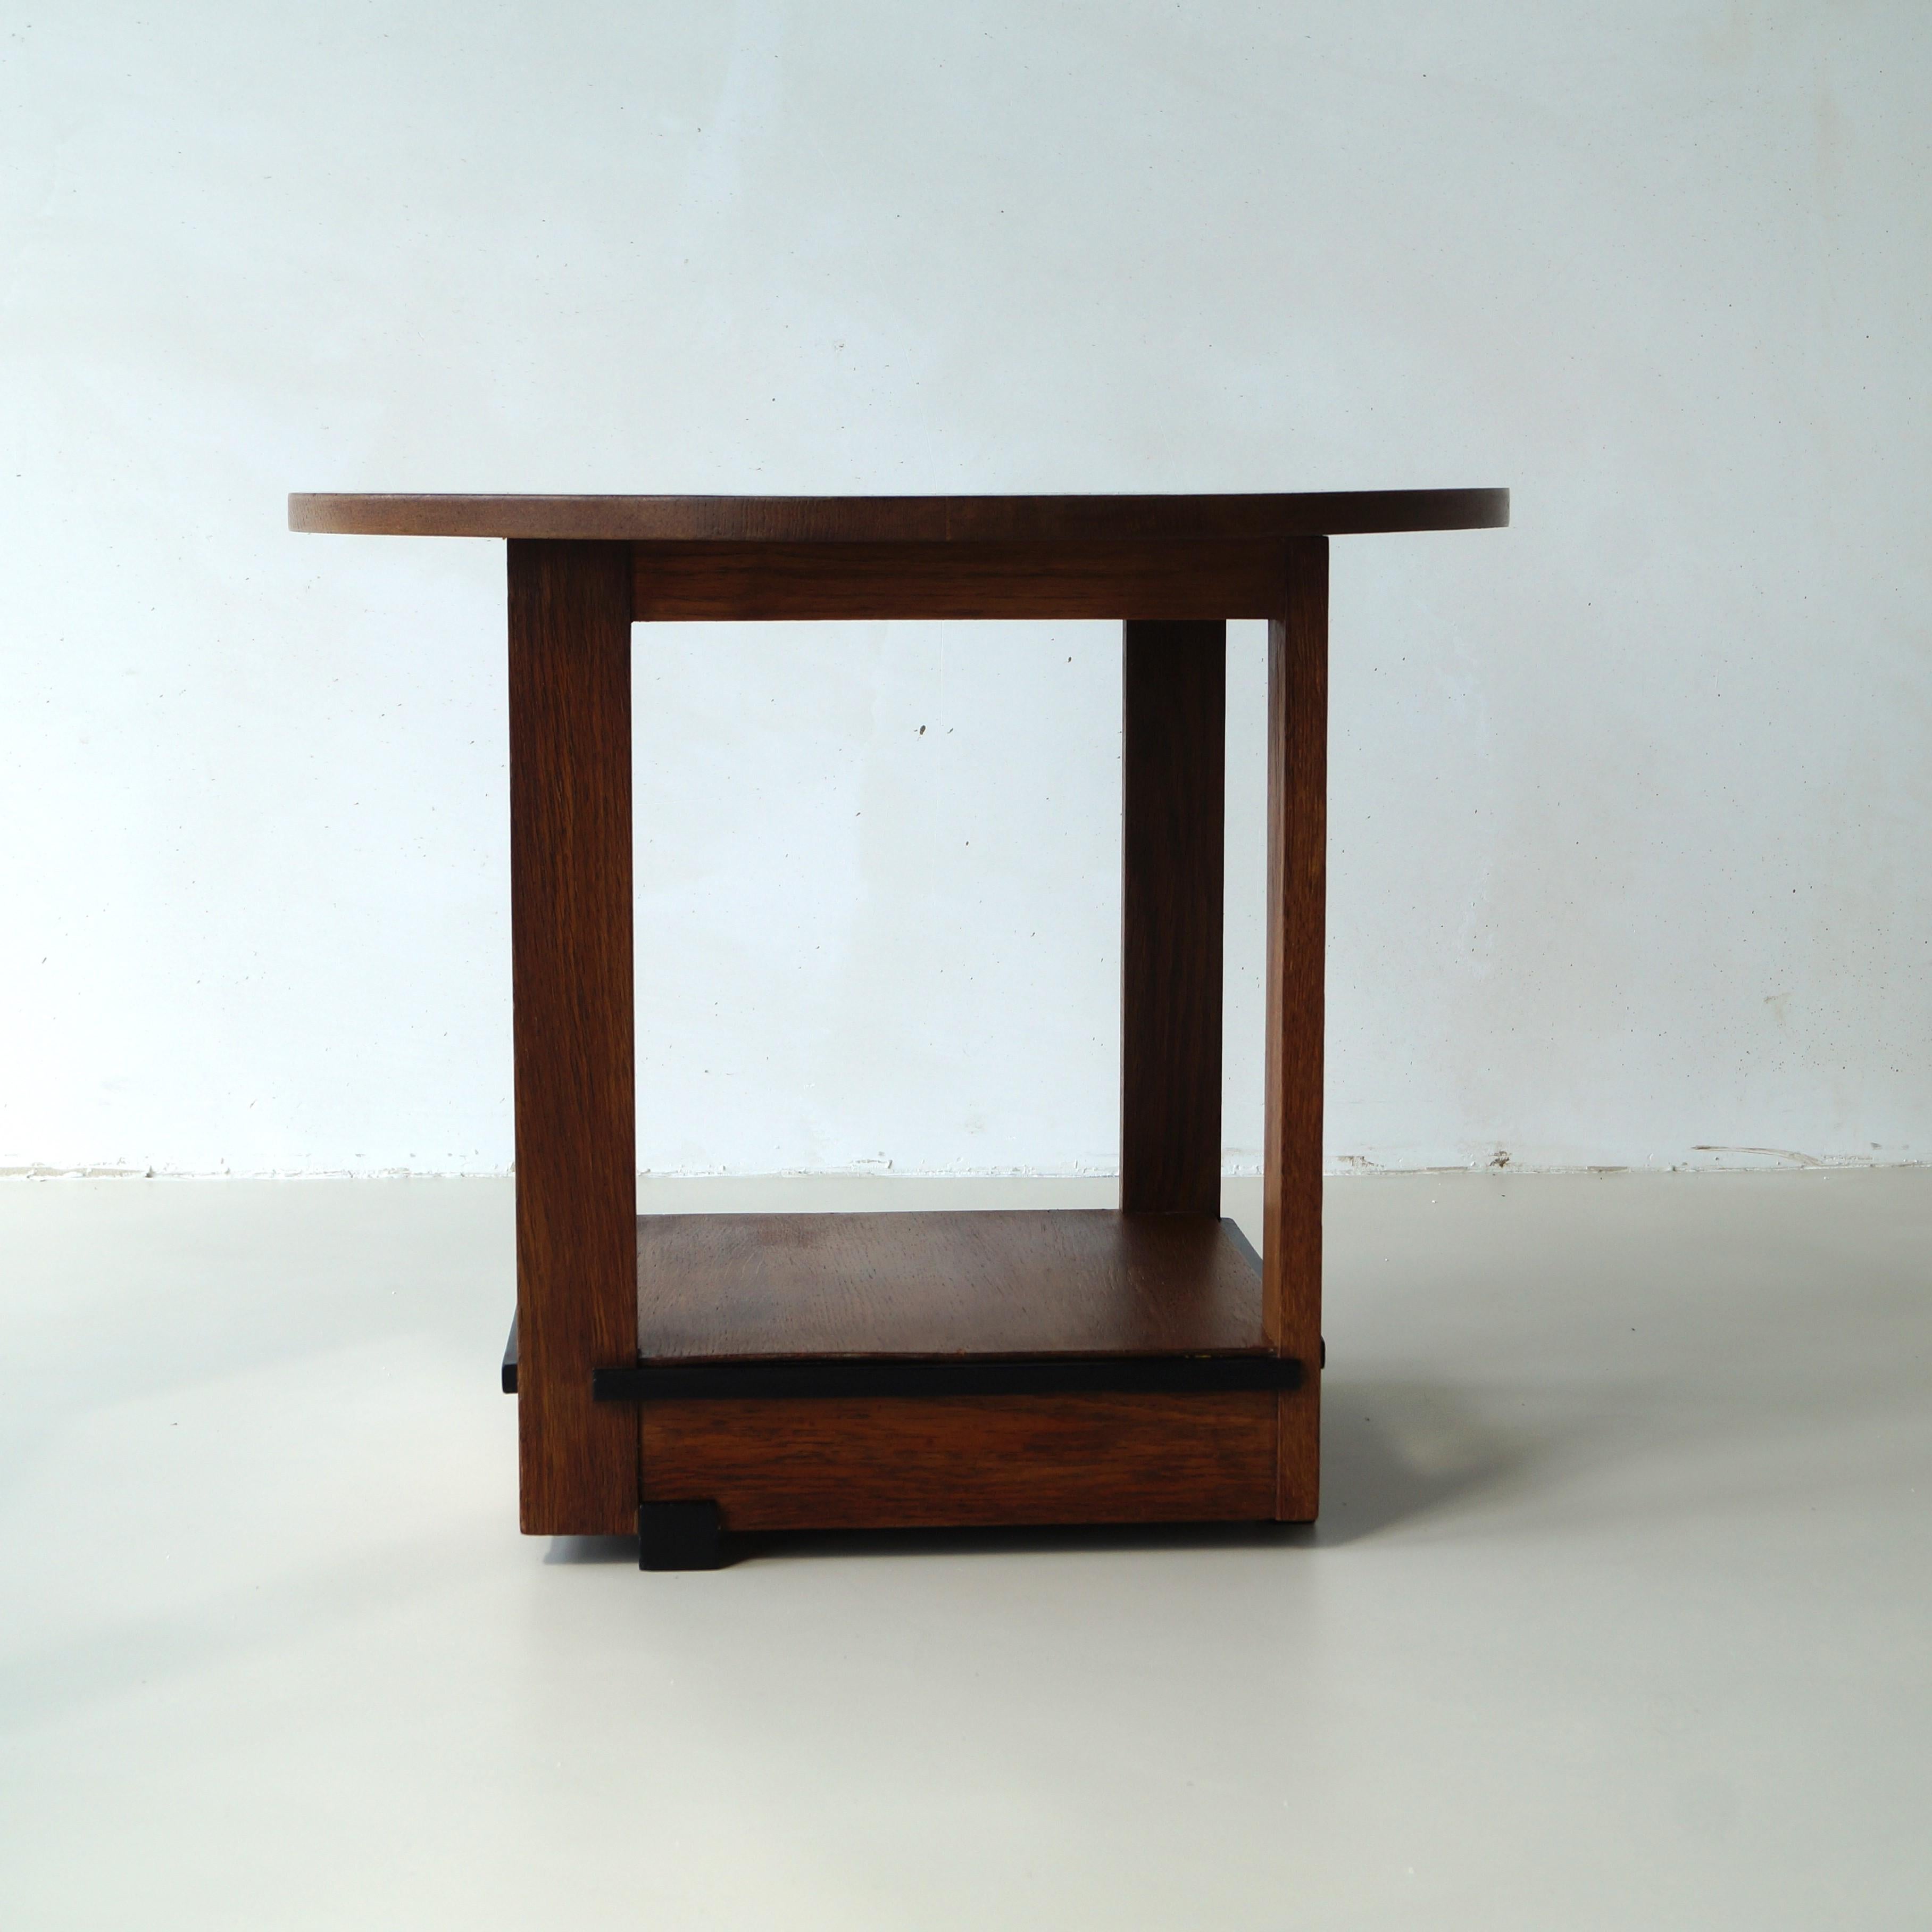 A Dutch Art Deco side table, typically Haagse School (The Hague School), ca. 1925. The design is very modernist. Based on similar designs and the opinion of an expert in the field, the table has been attributed to Jan Brunott (1889-1951).
This table